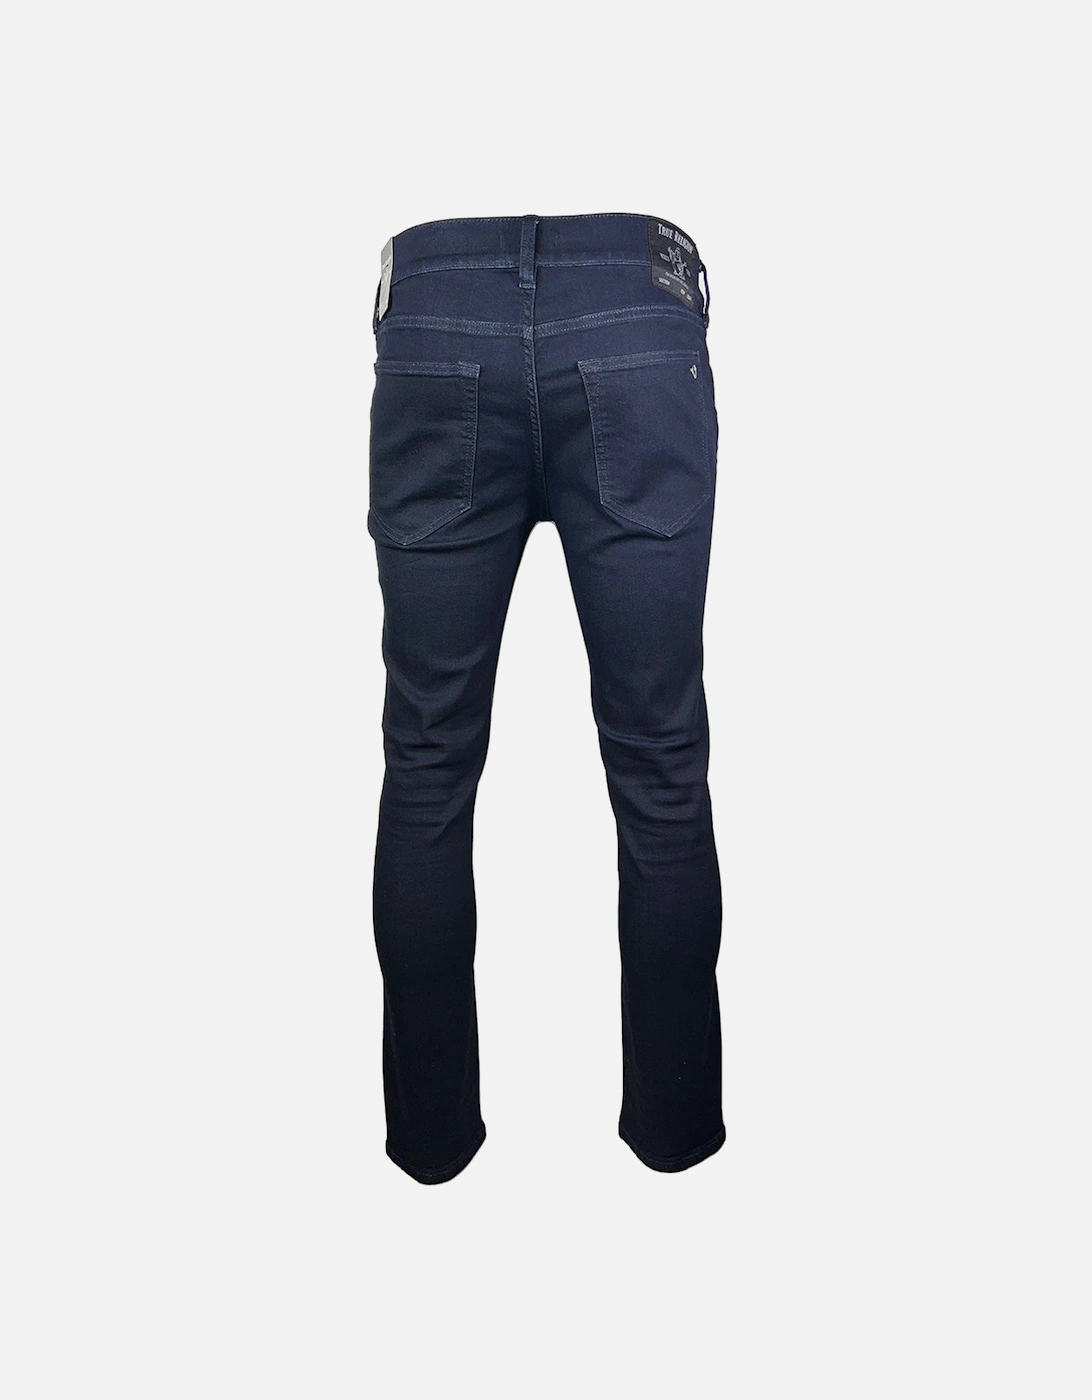 NF SN 30 Inseam Rocco Flap Jeans Navy